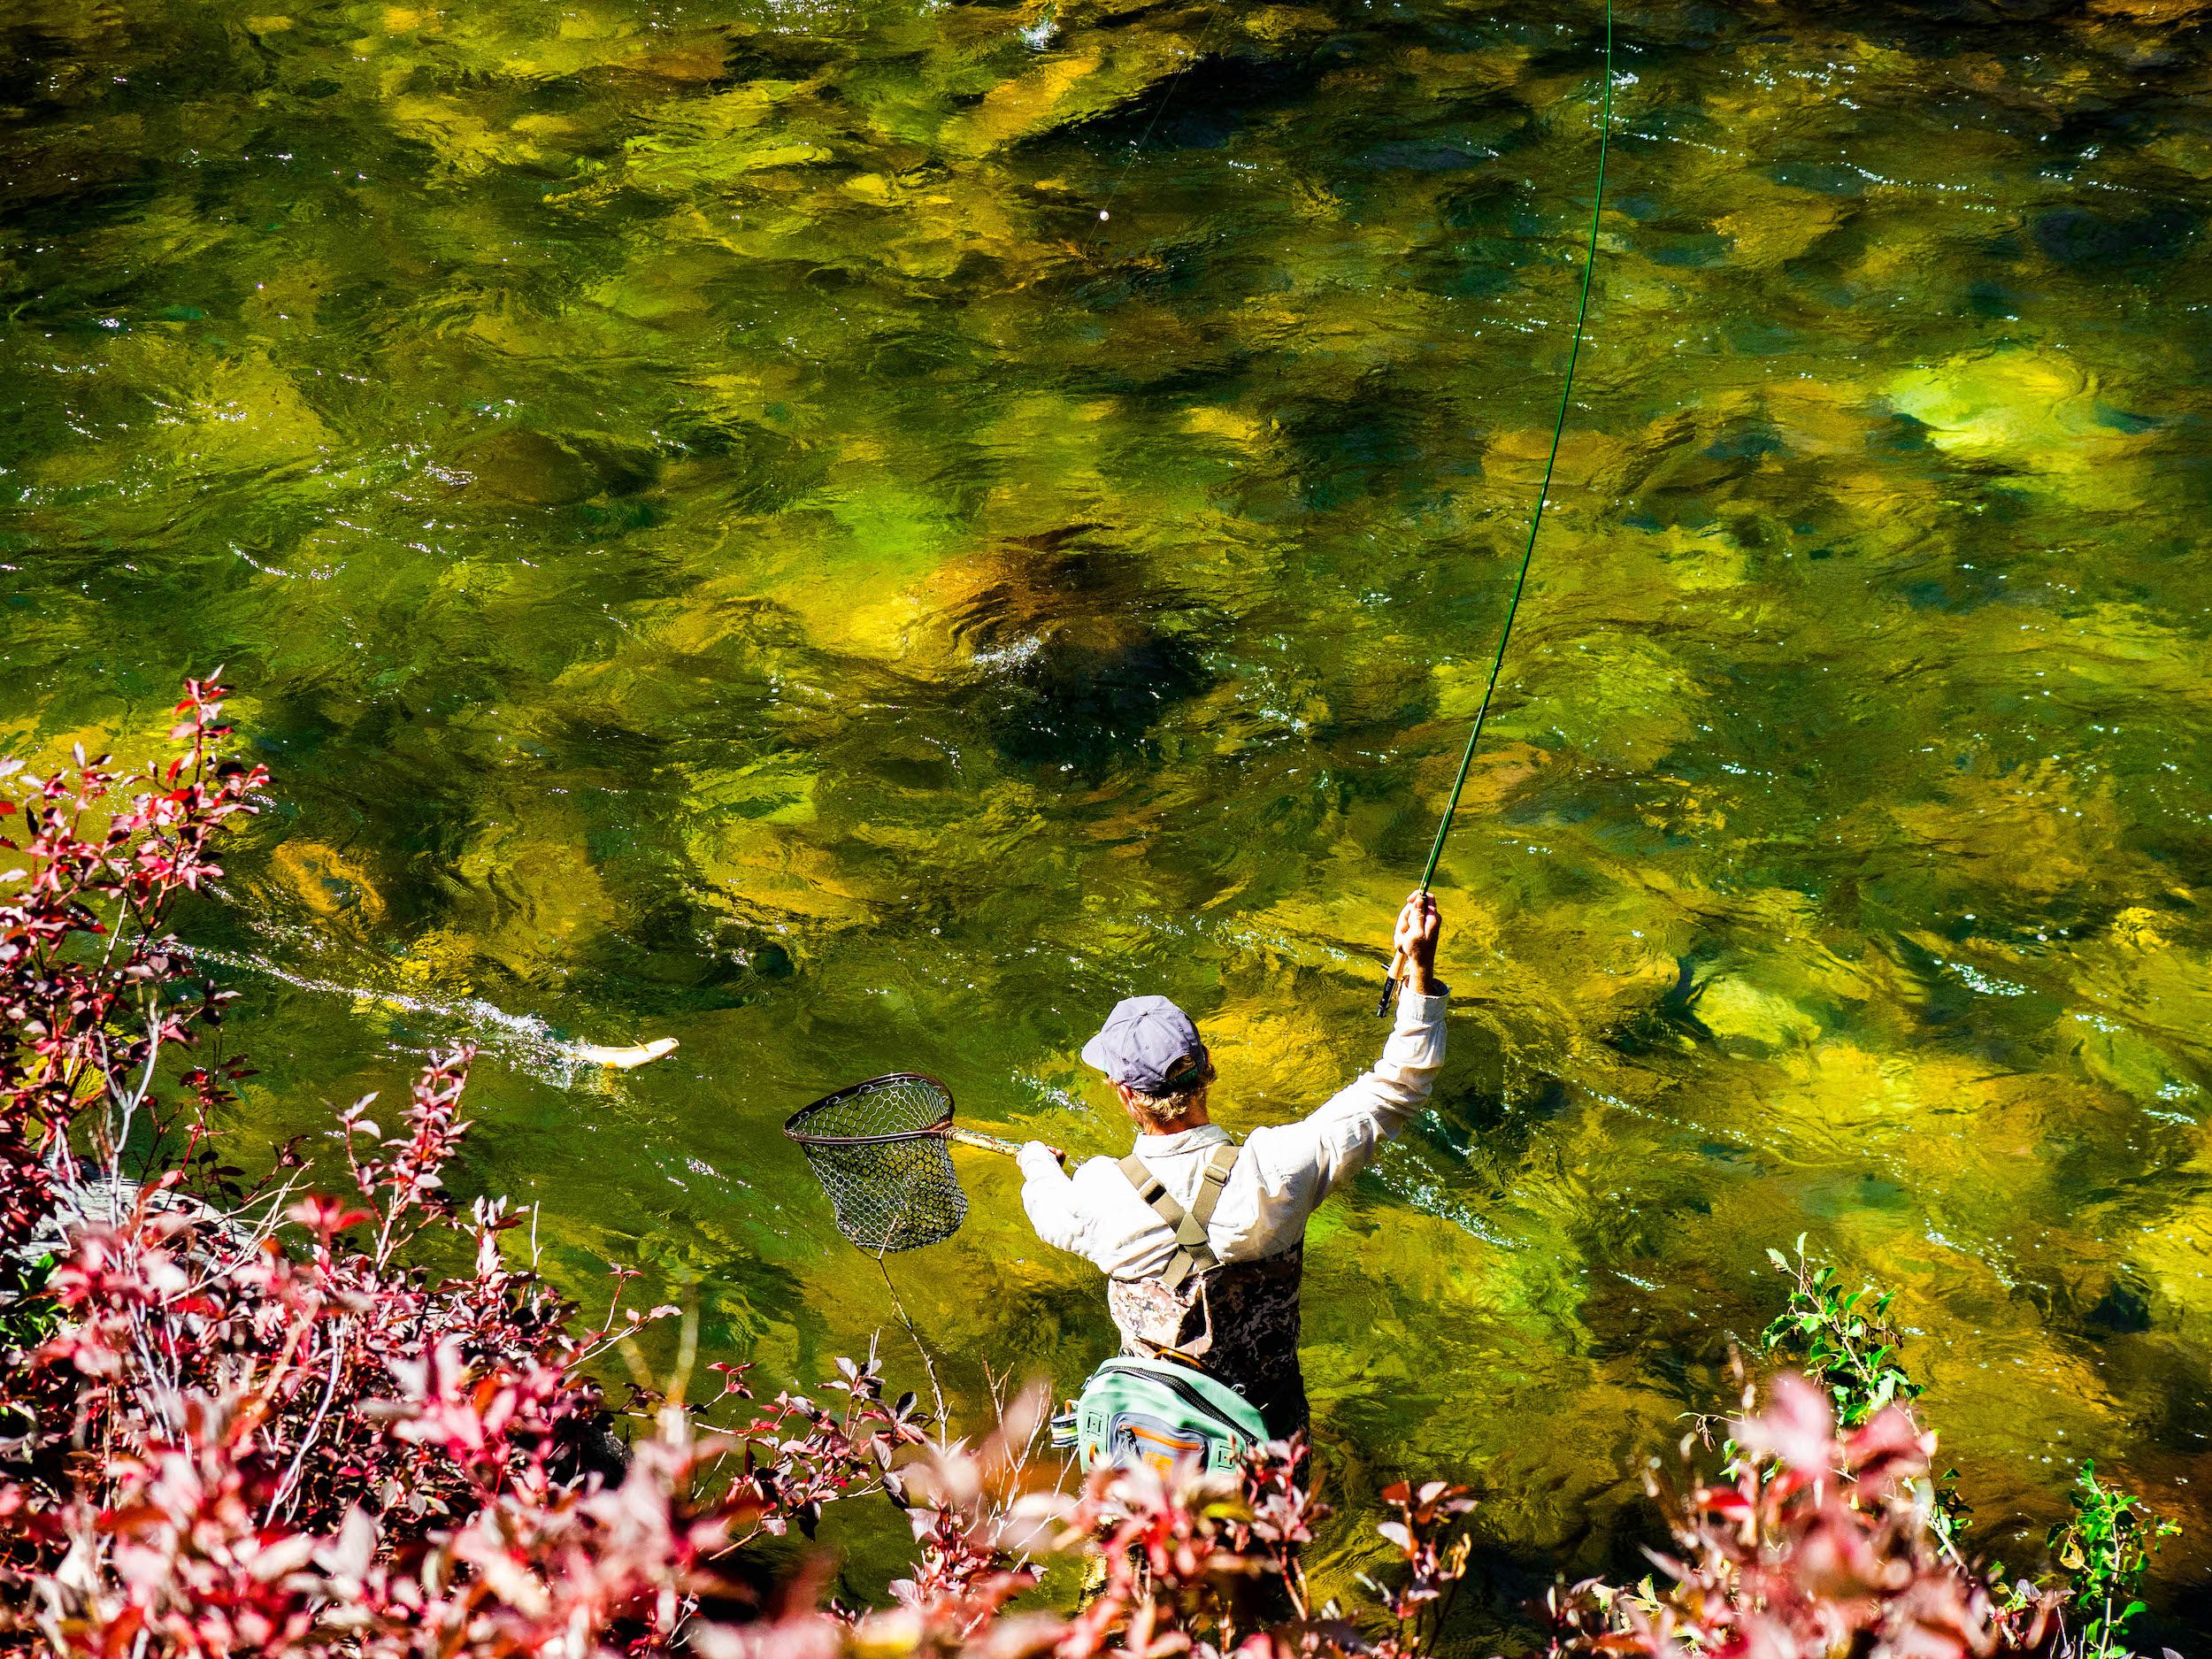 A fly fisherman casting his rod in the river